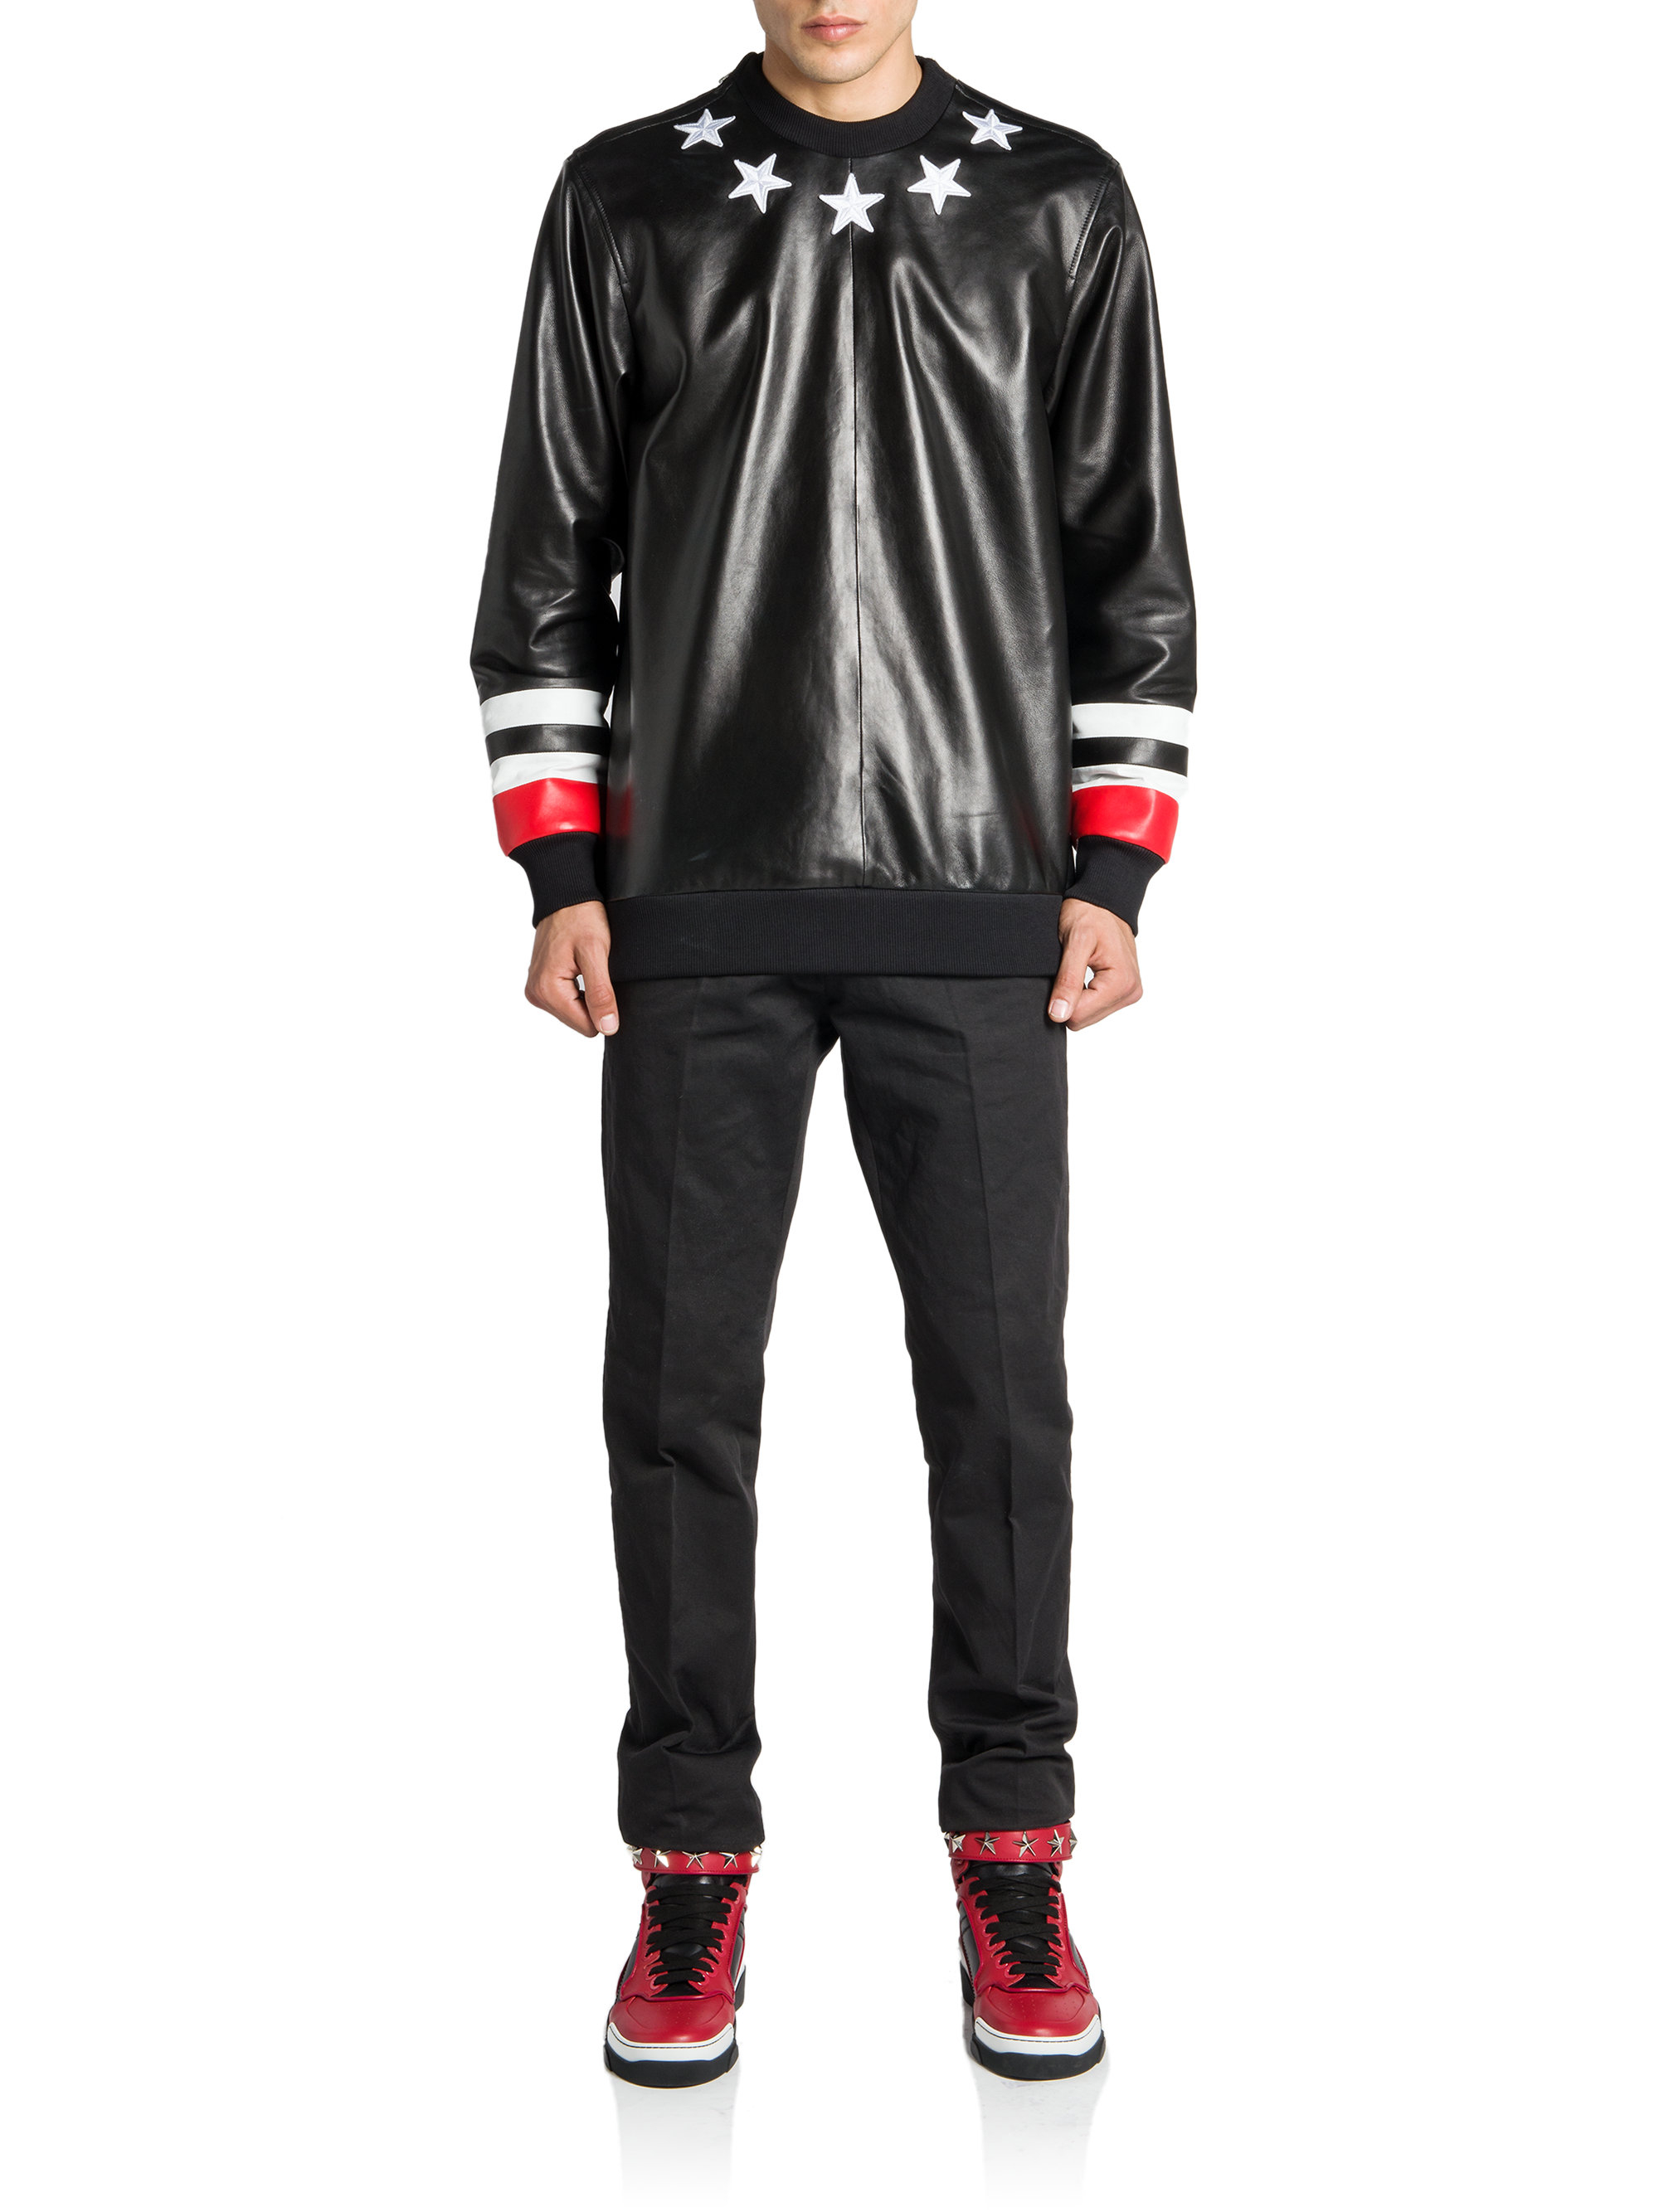 Givenchy Leather Star & Stripe Sweatshirt in Black for Men | Lyst